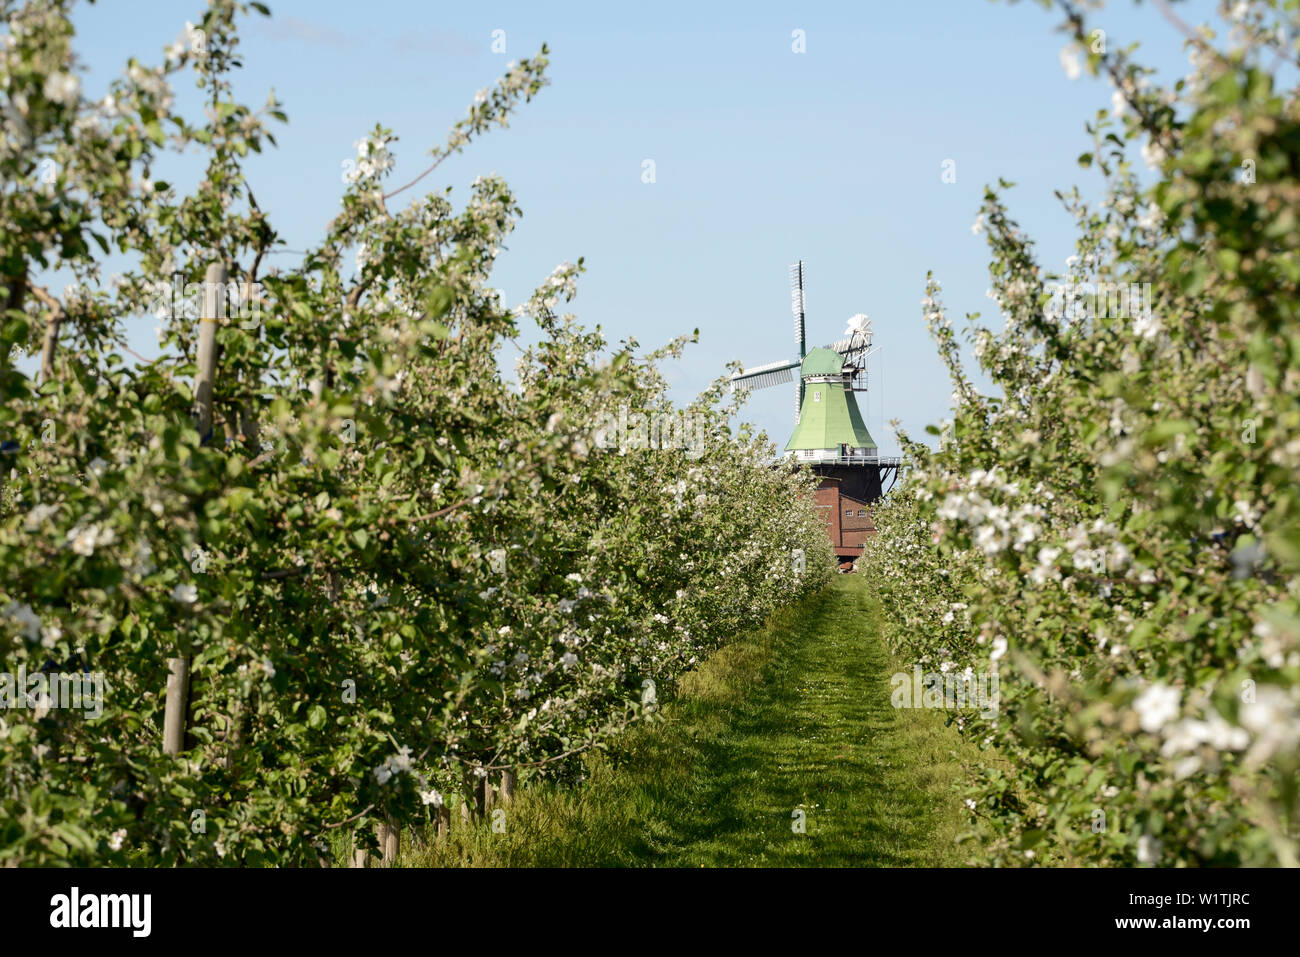 apple trees, blossoming, Altes Land, windmill, Venti Amica, Hollern-Twielenfleth, Lühe, Stade - district, Lower Saxony, Germany, Europe Stock Photo